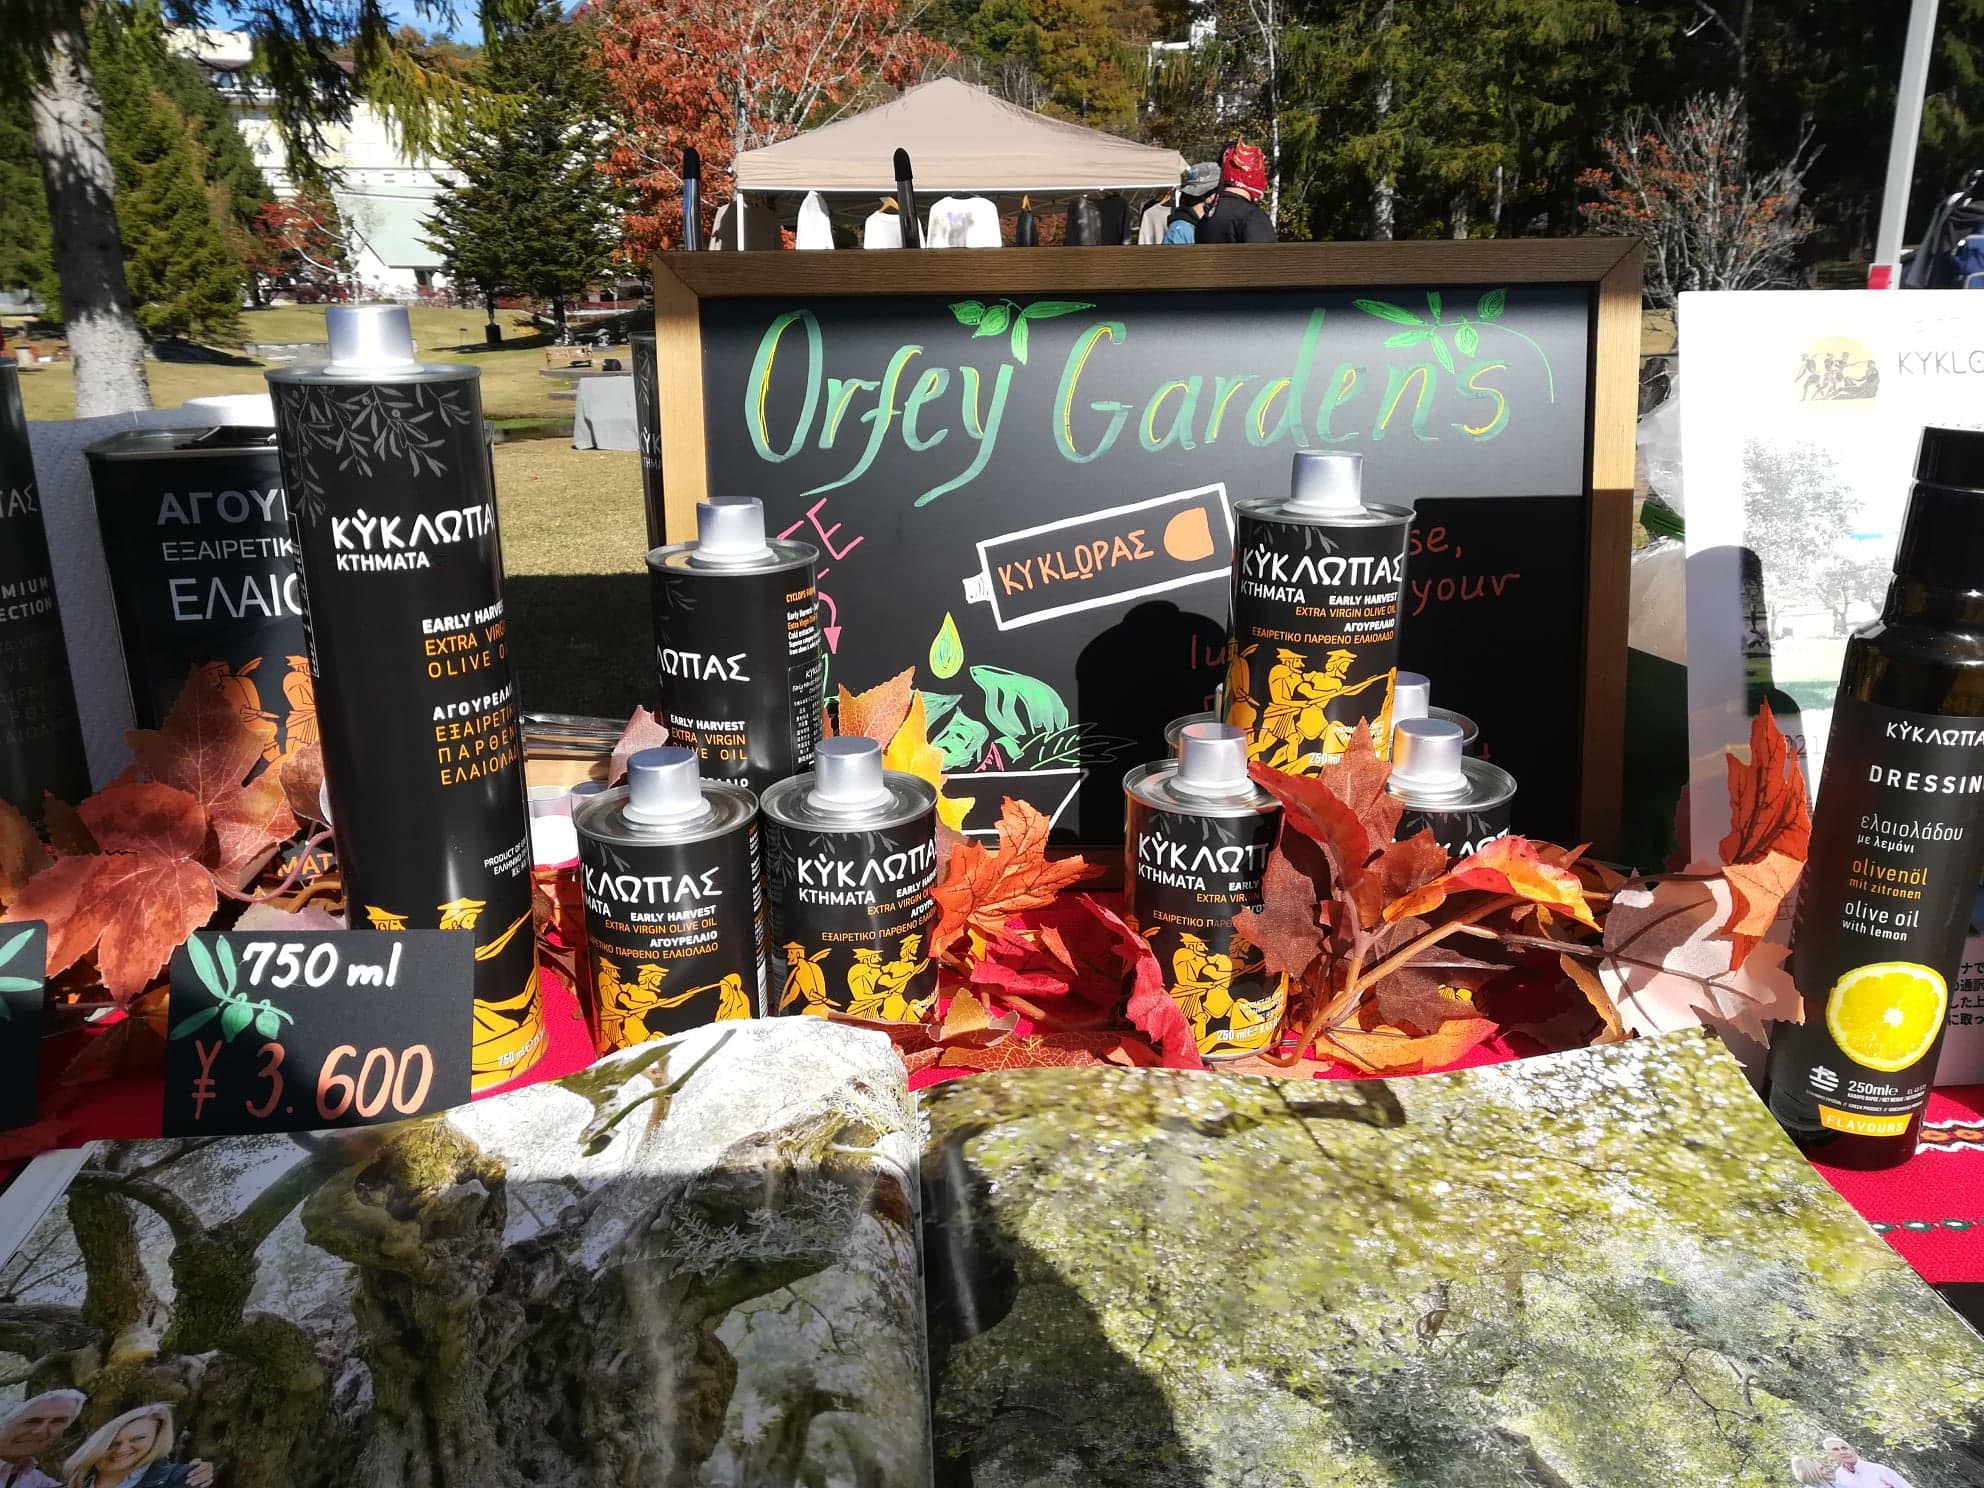 Orfey Gardens booth selling Kyklopas Olive Oil